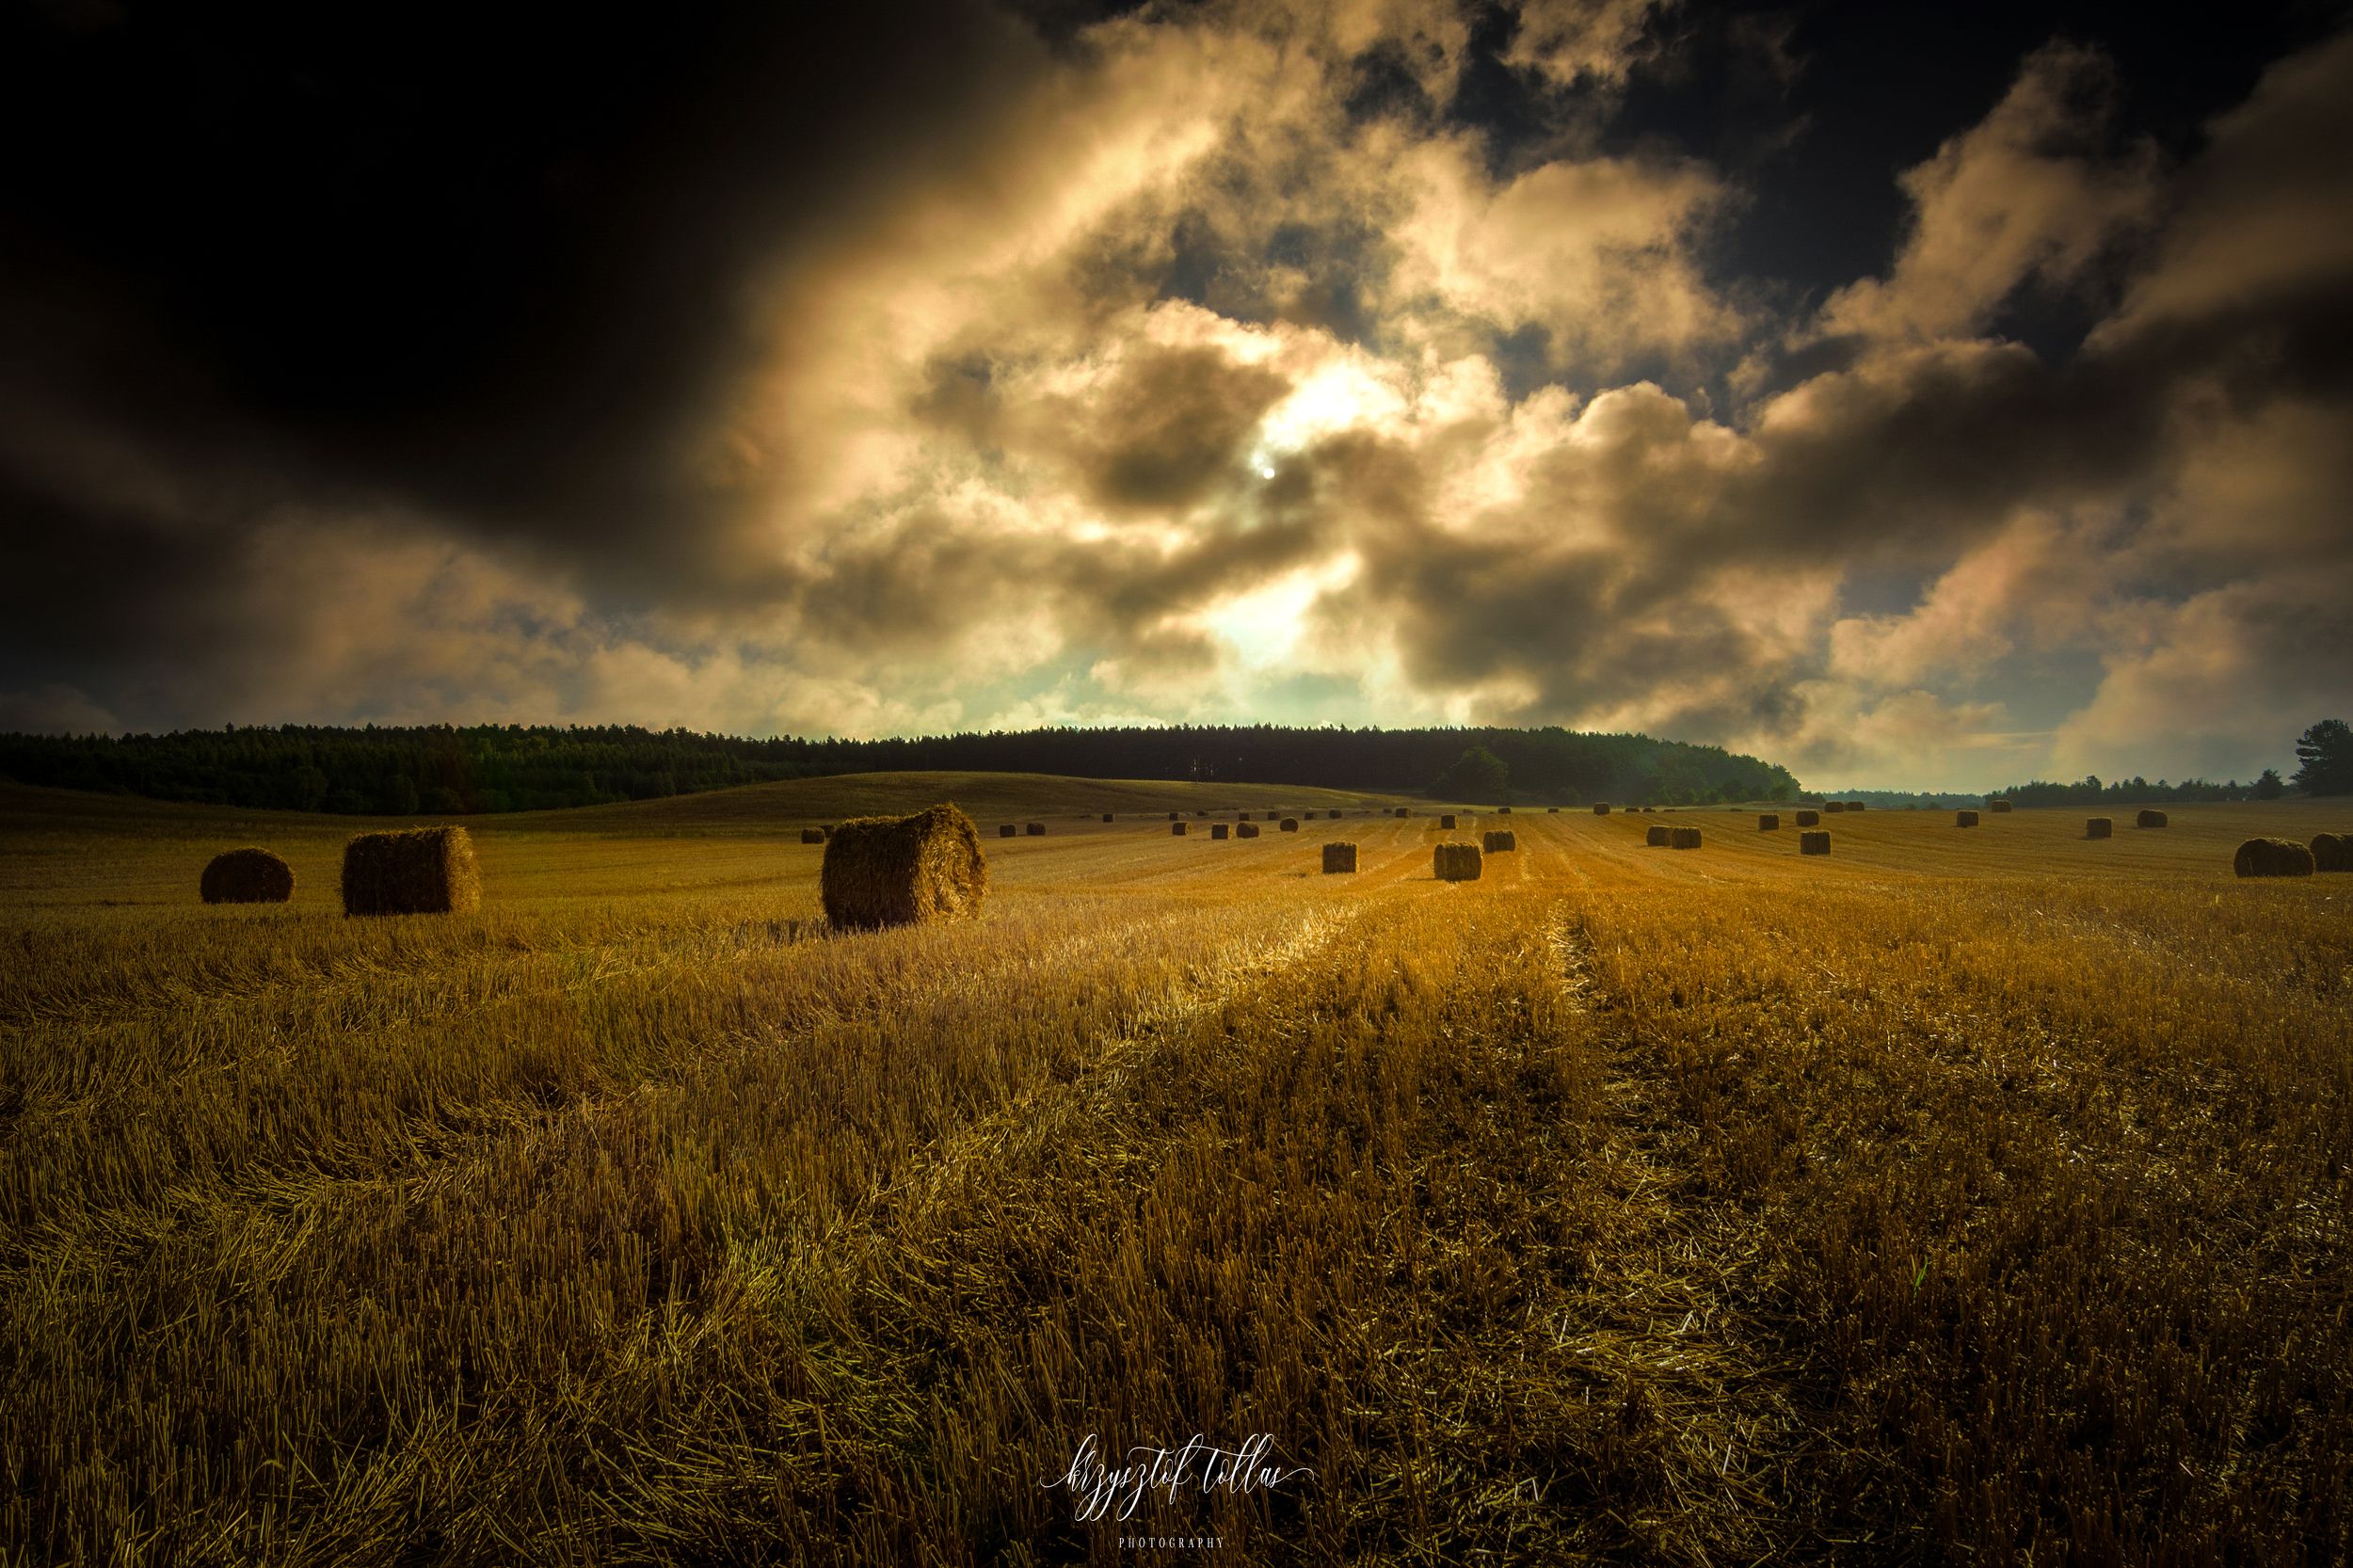 Field  hay bales  landscape  nature  summer  sun  sky  clouds  dramatic clouds  morning  cultivation  agriculture  nikon  light  Agricultural Field  Landscape - Scenery, Krzysztof Tollas